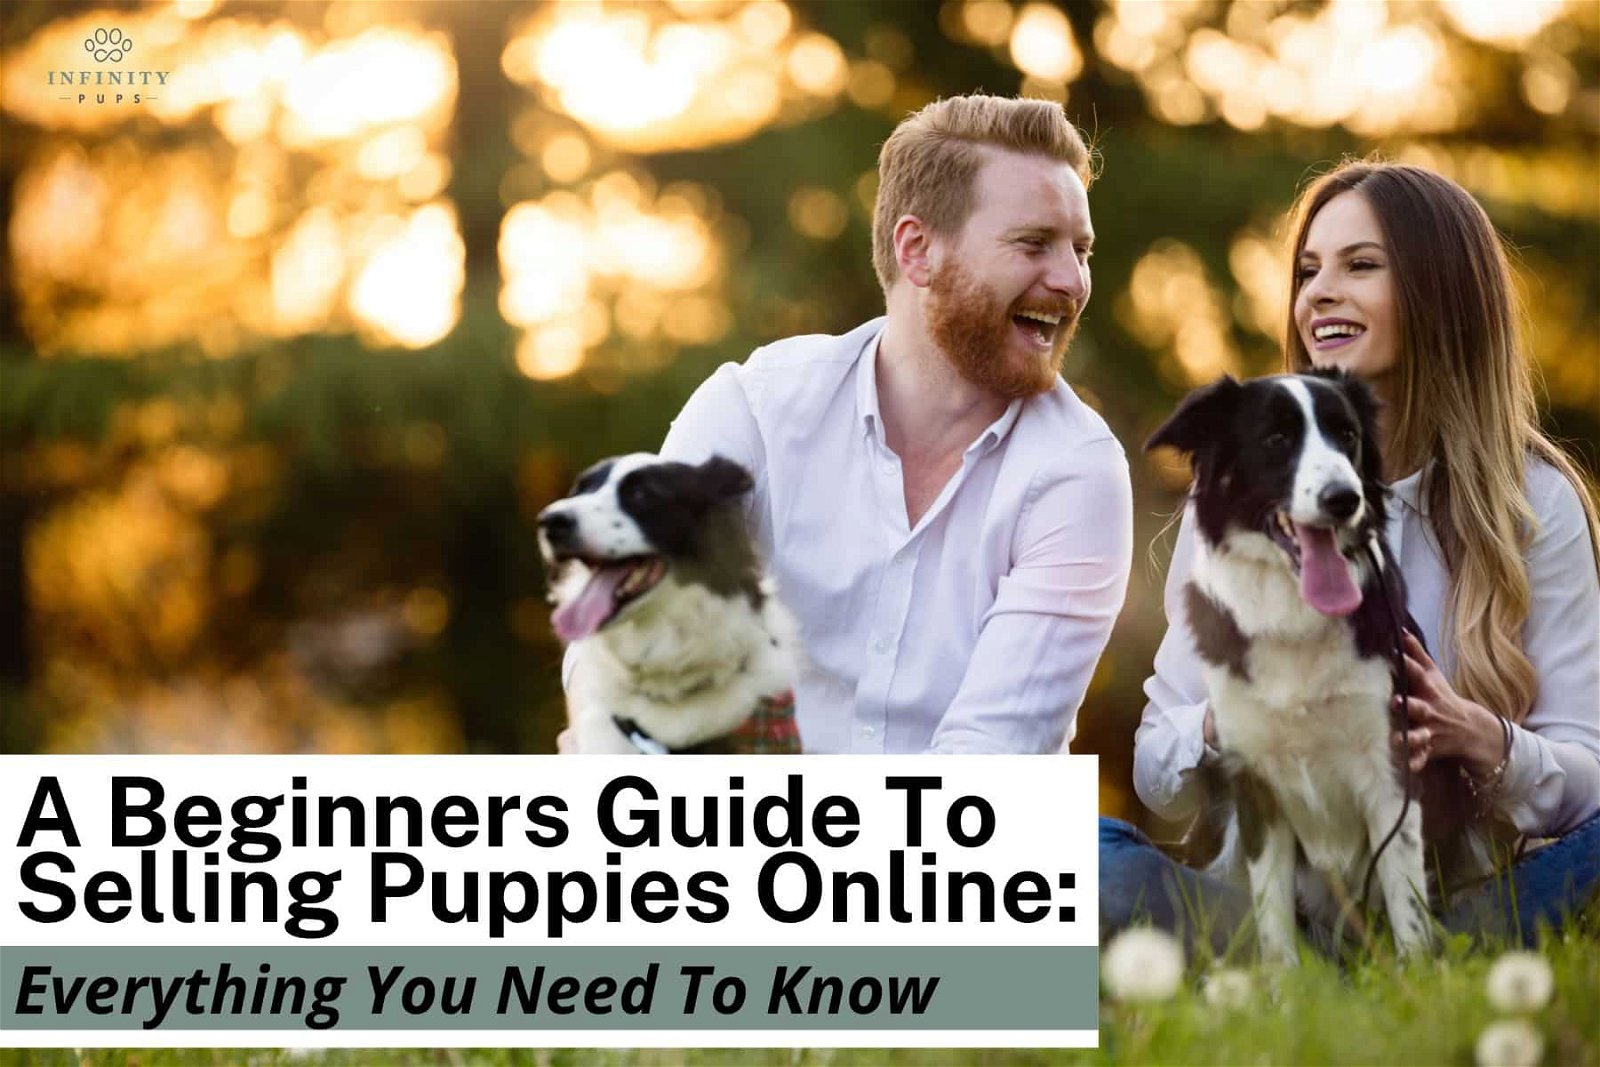 A Beginners Guide To Selling Puppies Online: Everything You Need To Know 2